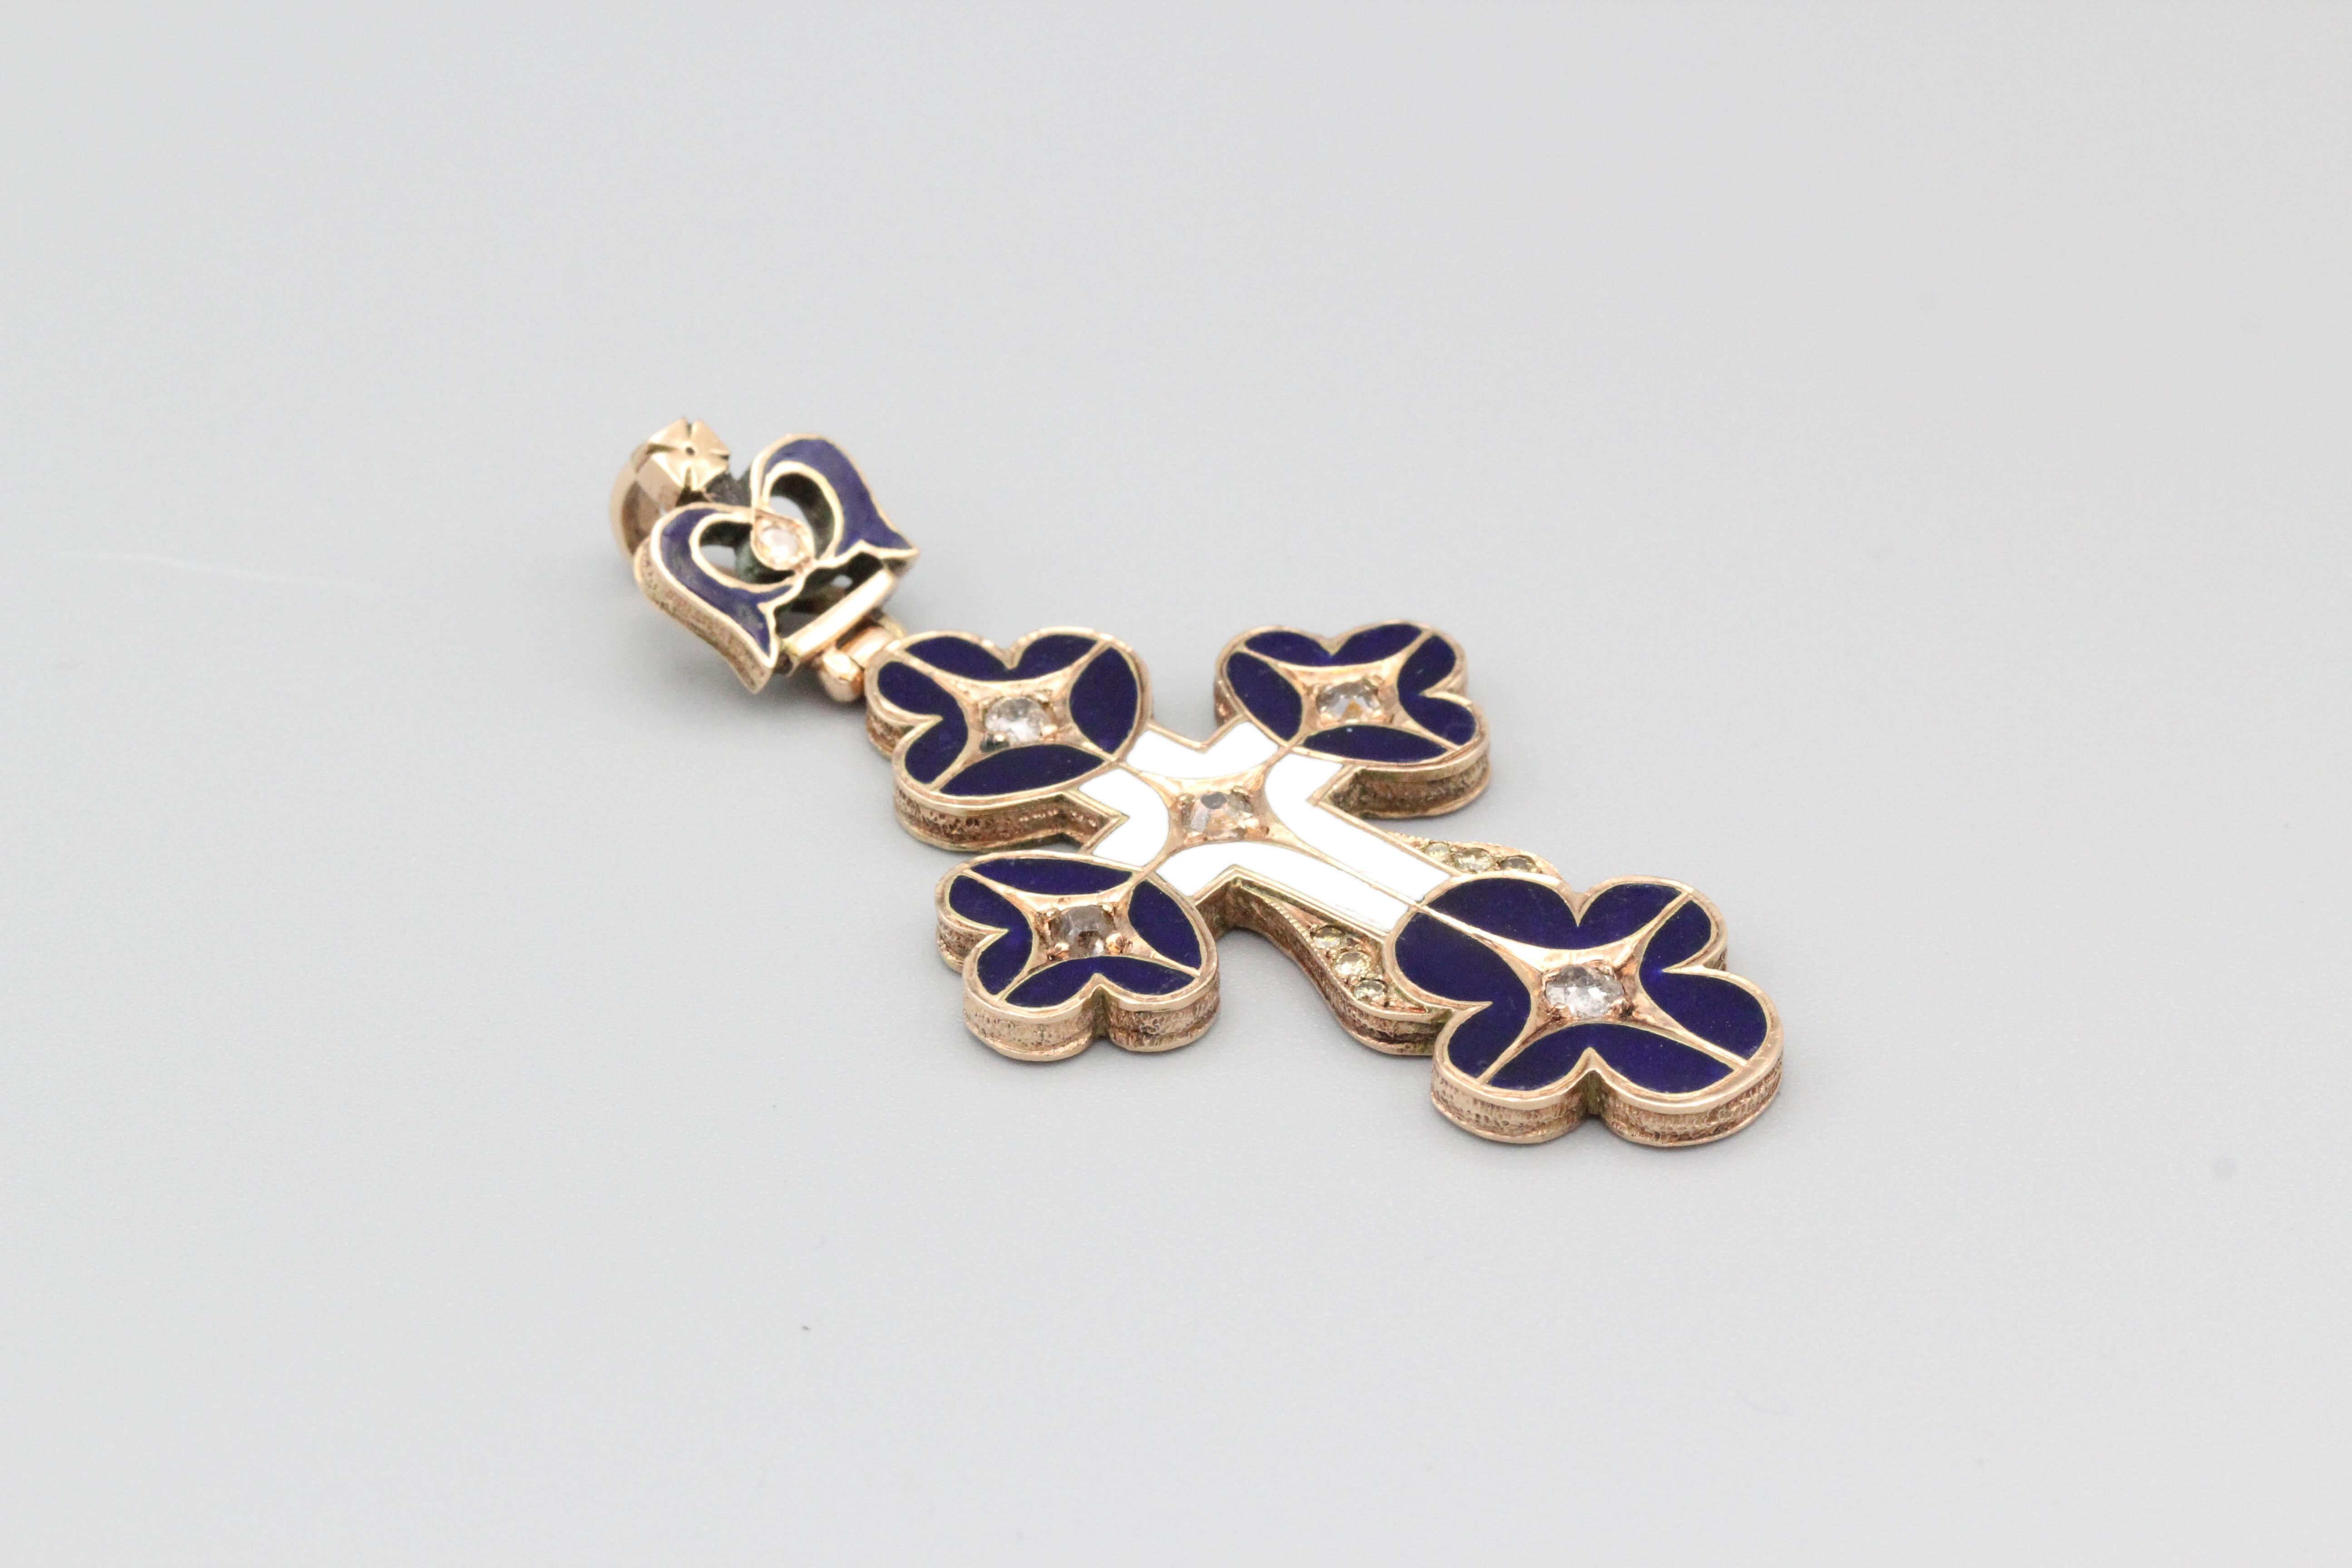 Fine diamond, enamel and 14K gold cross pendant of Russian origin, circa early 20th century. It features an ornate design with navy blue and white enamel. Diamonds are old cut.

Hallmarks: 56 (standard 14K gold mark), maker's mark.